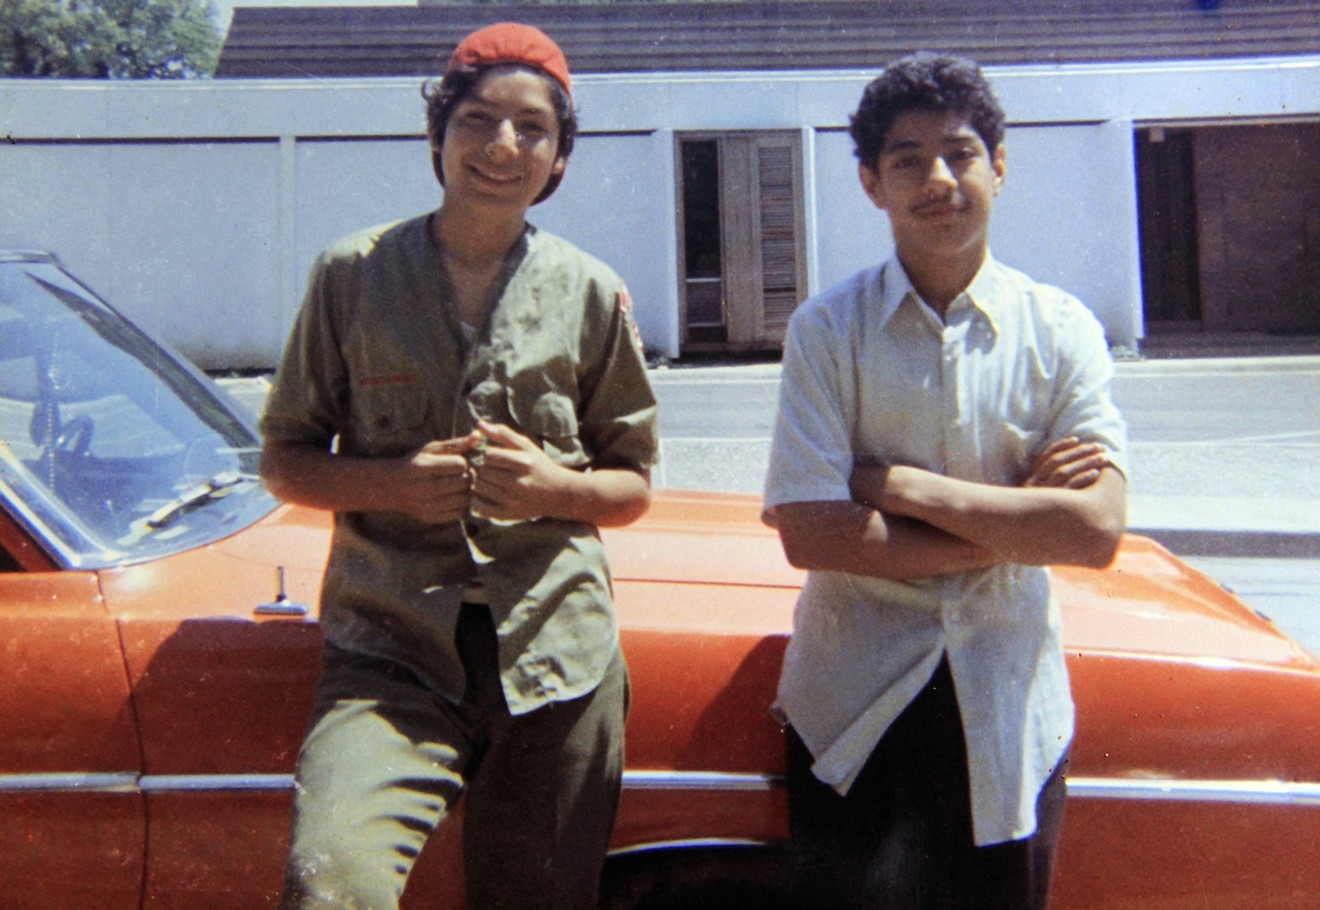 David Rodriguez, 13, and his brother, Santos, in 1973, only months before Santos was murdered by a Dallas police officer.